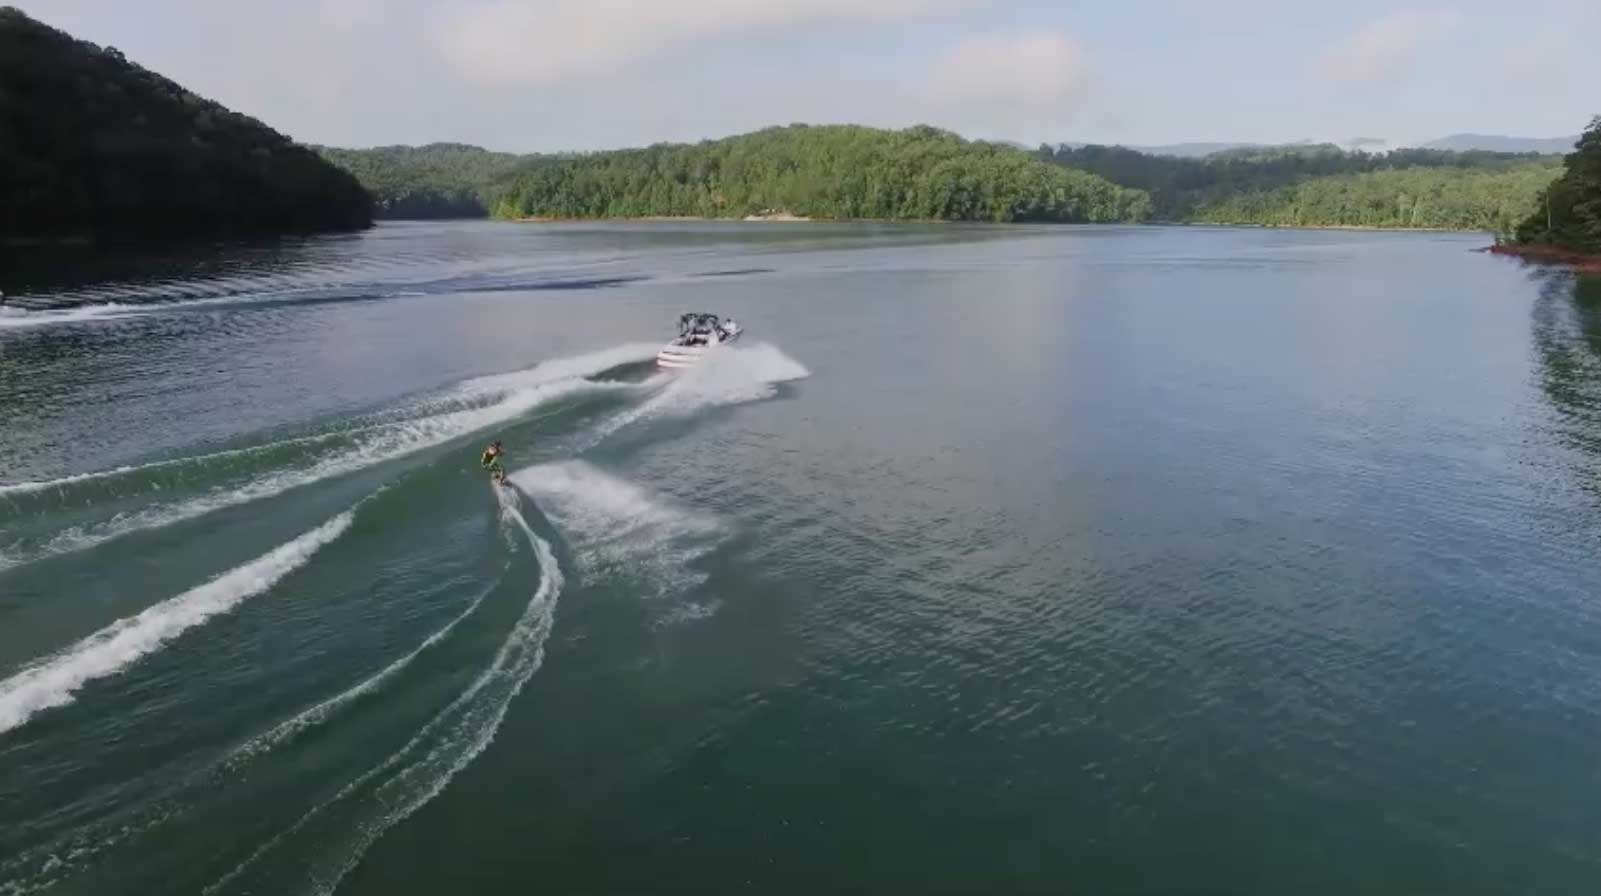 5 THINGS TO DO WHILE YOU'RE AT NORRIS LAKE